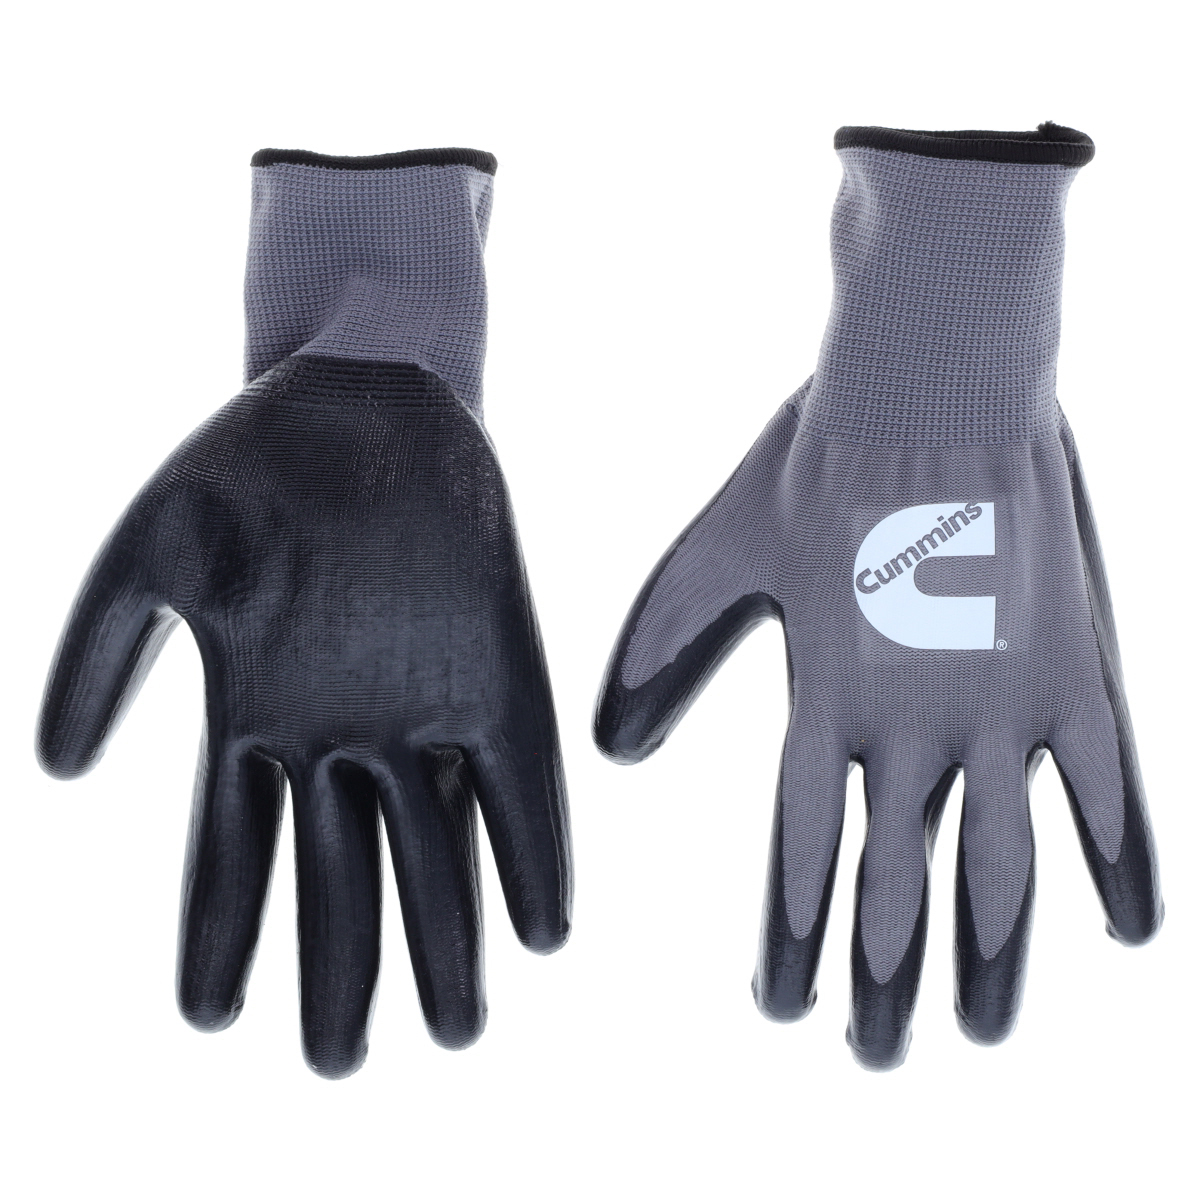 Gray Nitrile Dipped Palm Gloves, Large